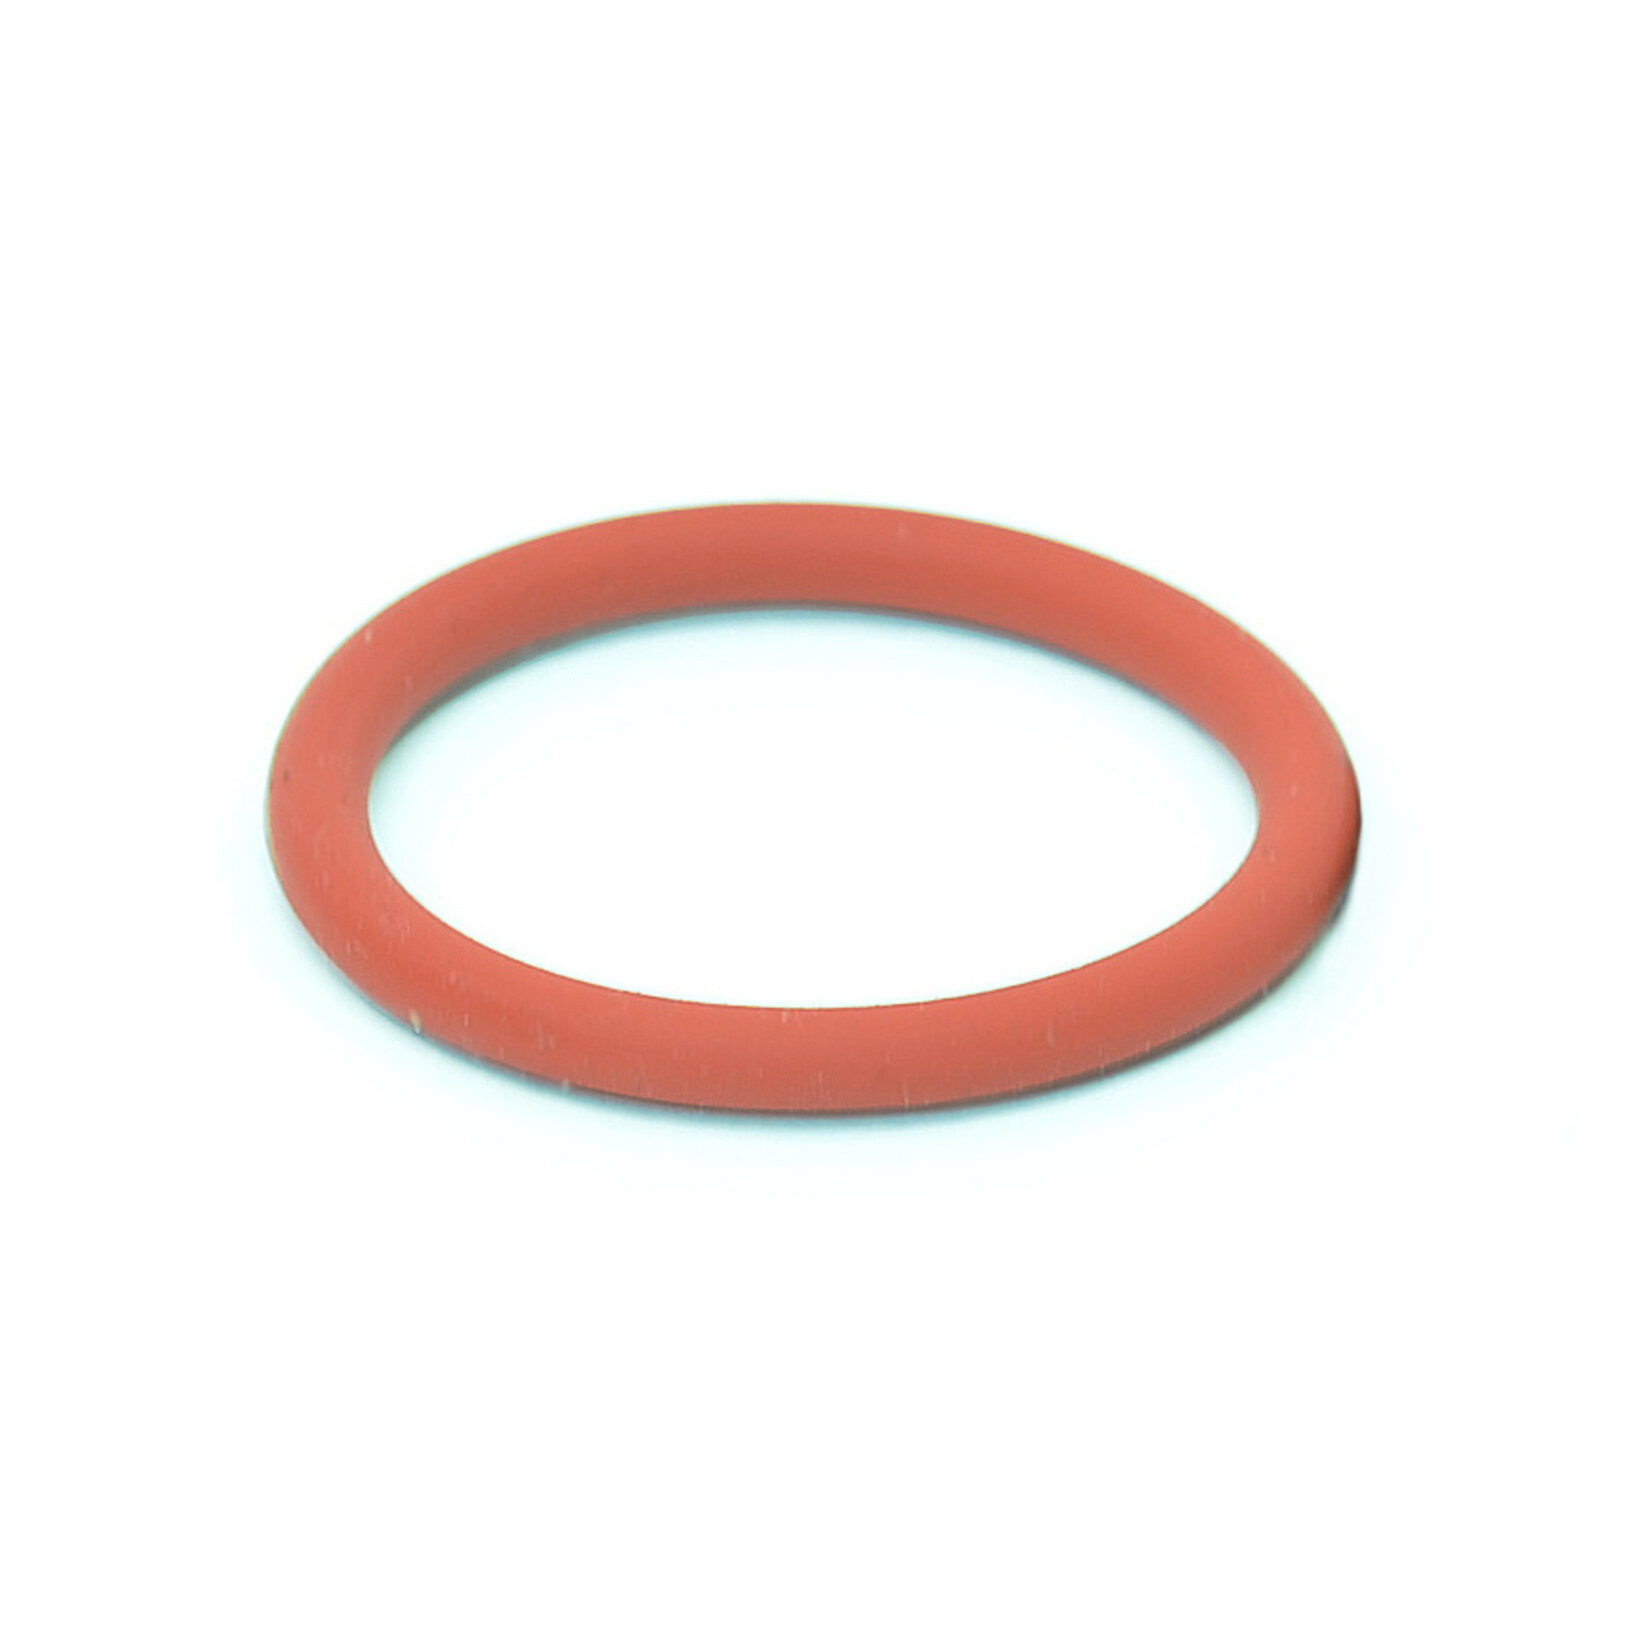 Notrot O-ring Ena Micro/A-serie 29,75 x 3,53 mm